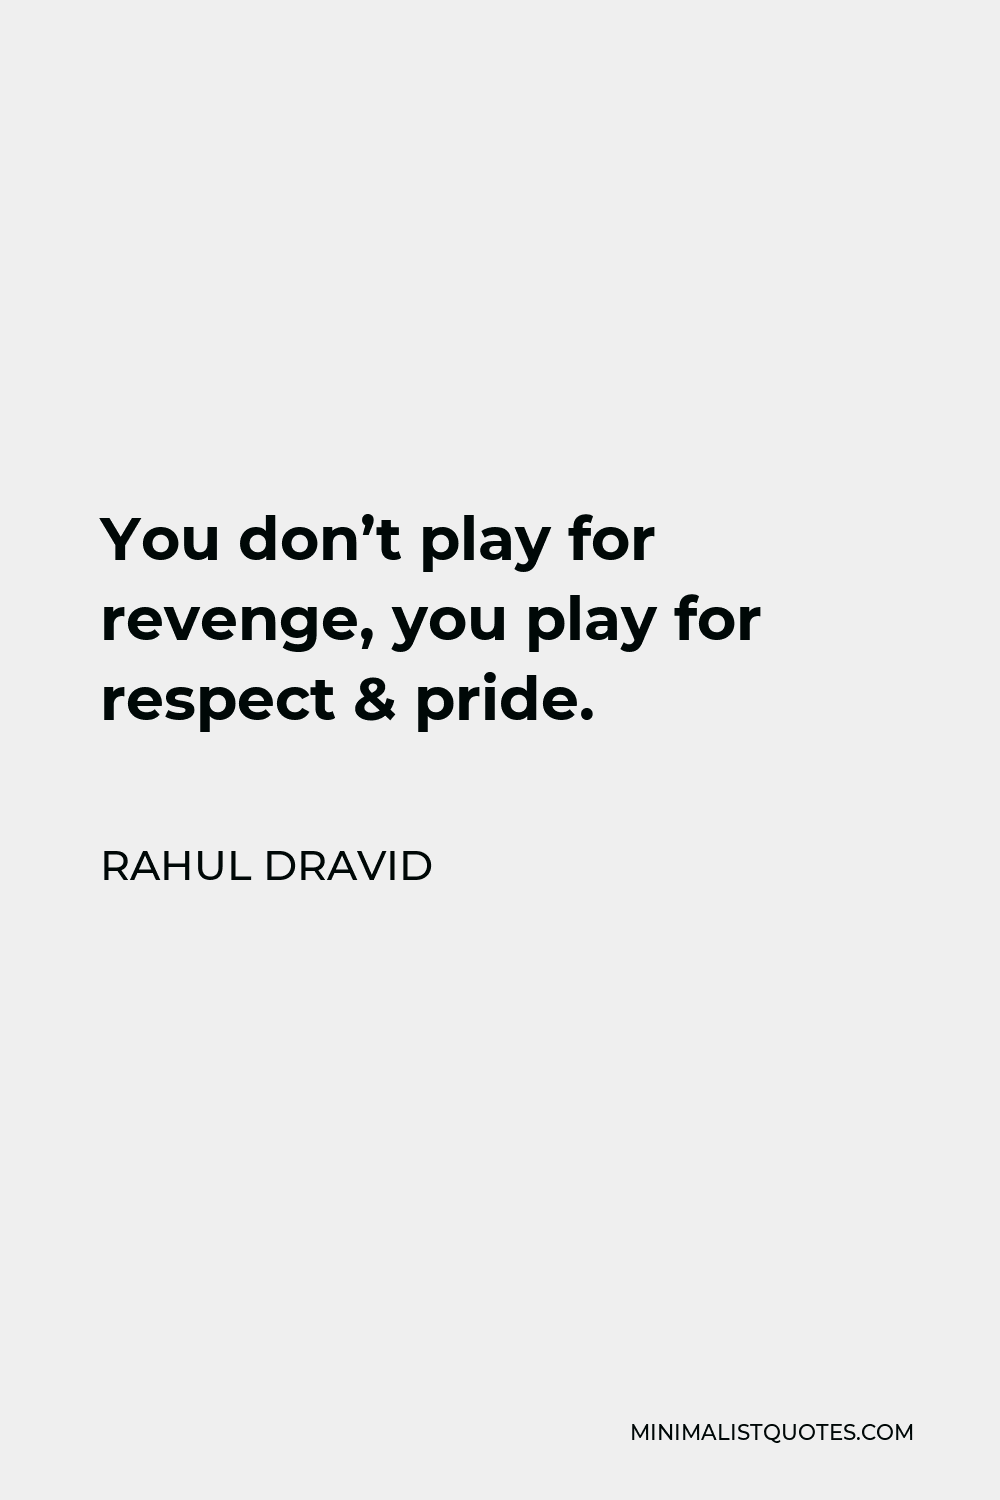 Rahul Dravid Quote - You don’t play for revenge, you play for respect & pride.